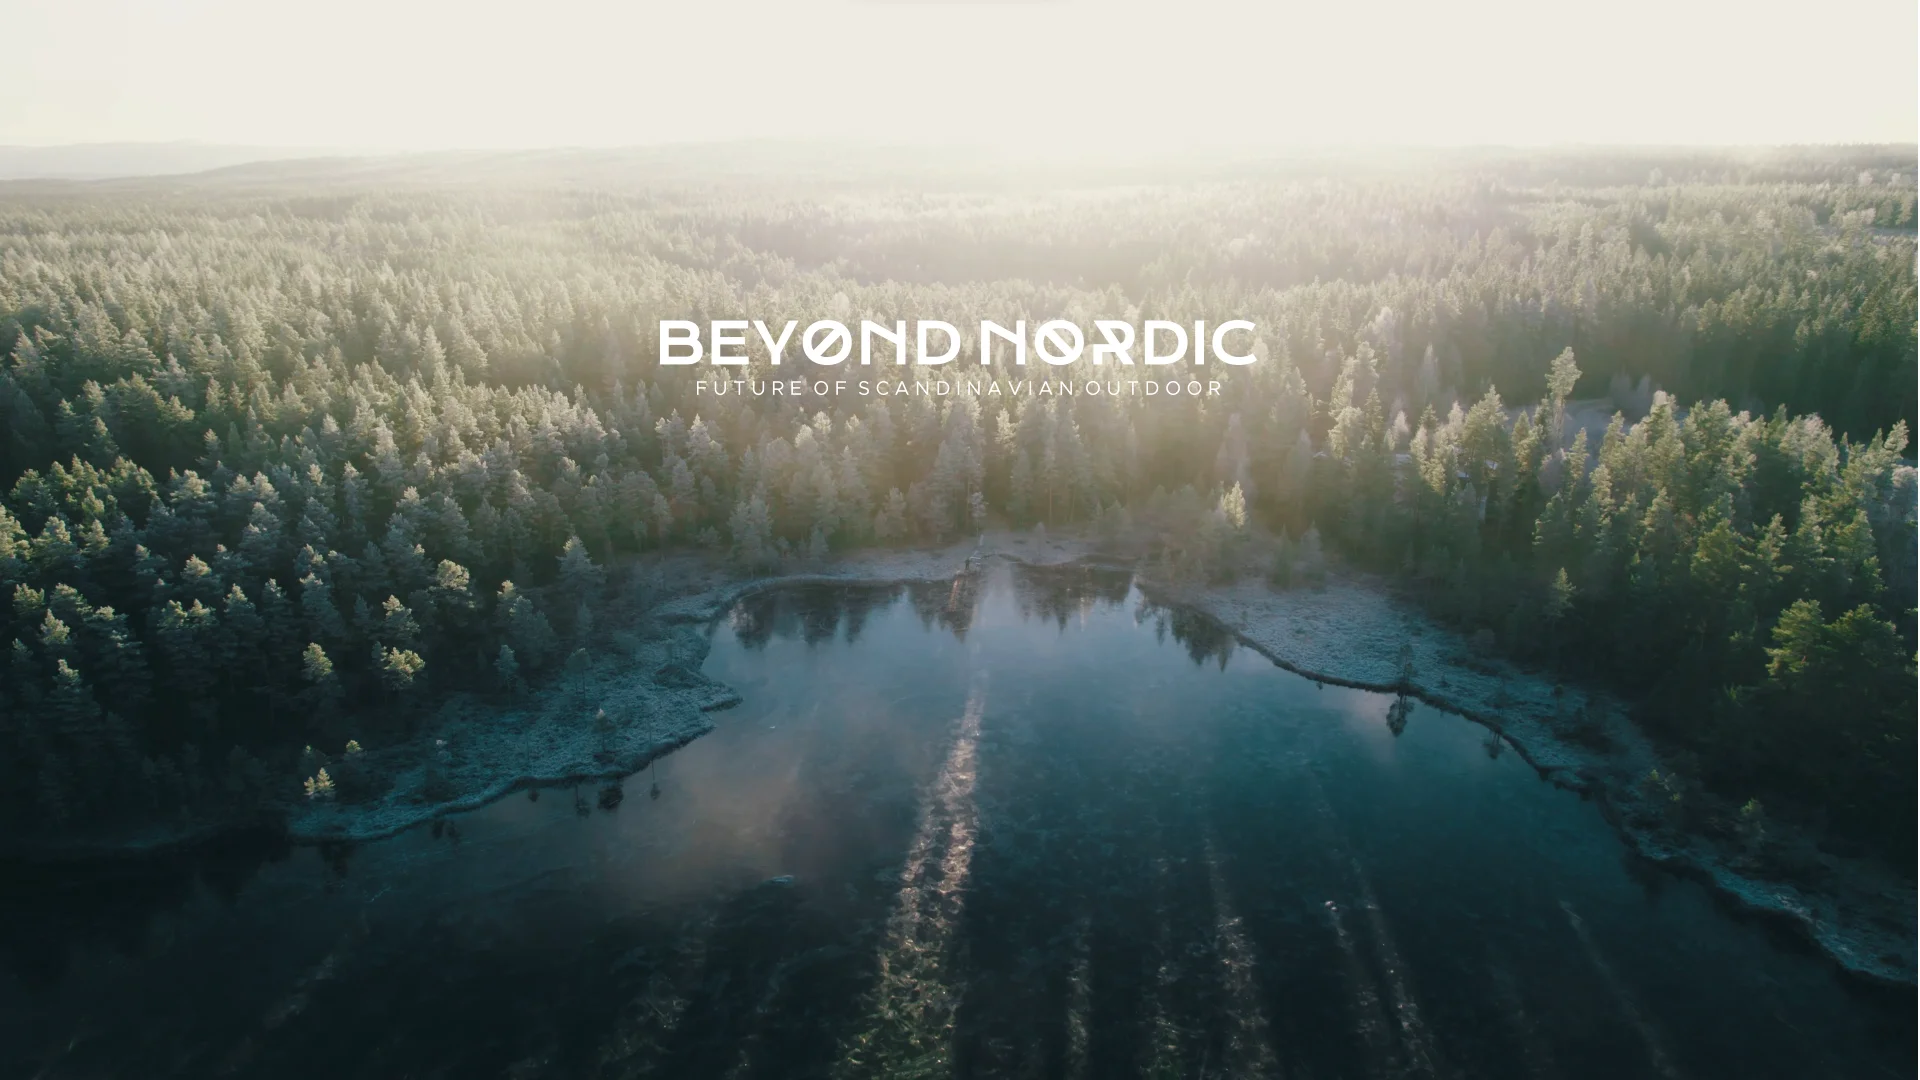 BN301 3L Lightweight Shell Jacket from Beyond Nordic on Vimeo